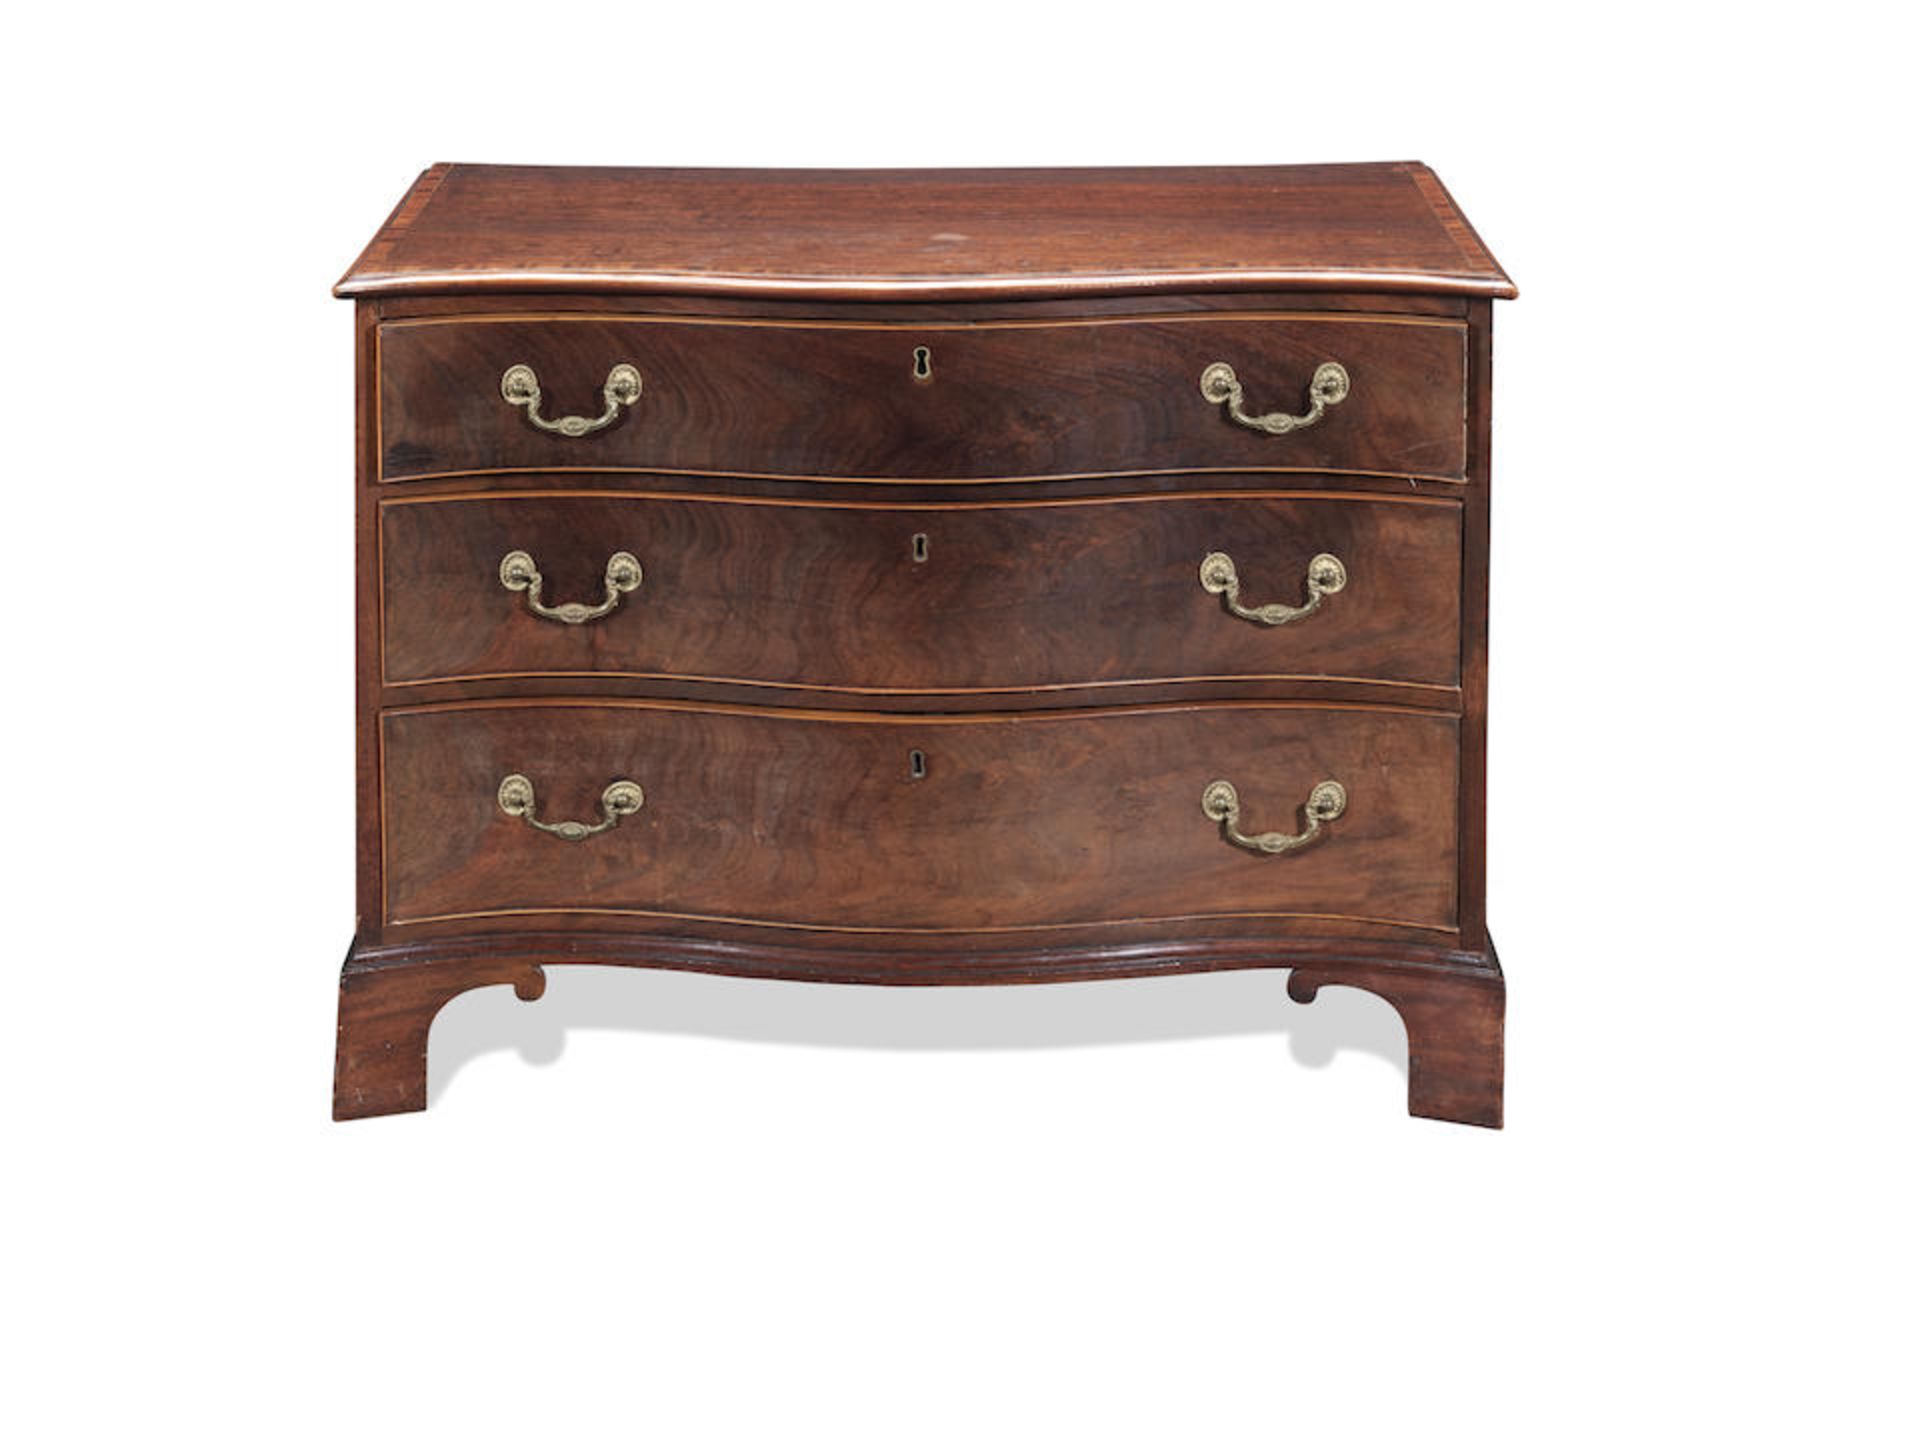 A George III mahogany serpentine chest of attractively low proportions